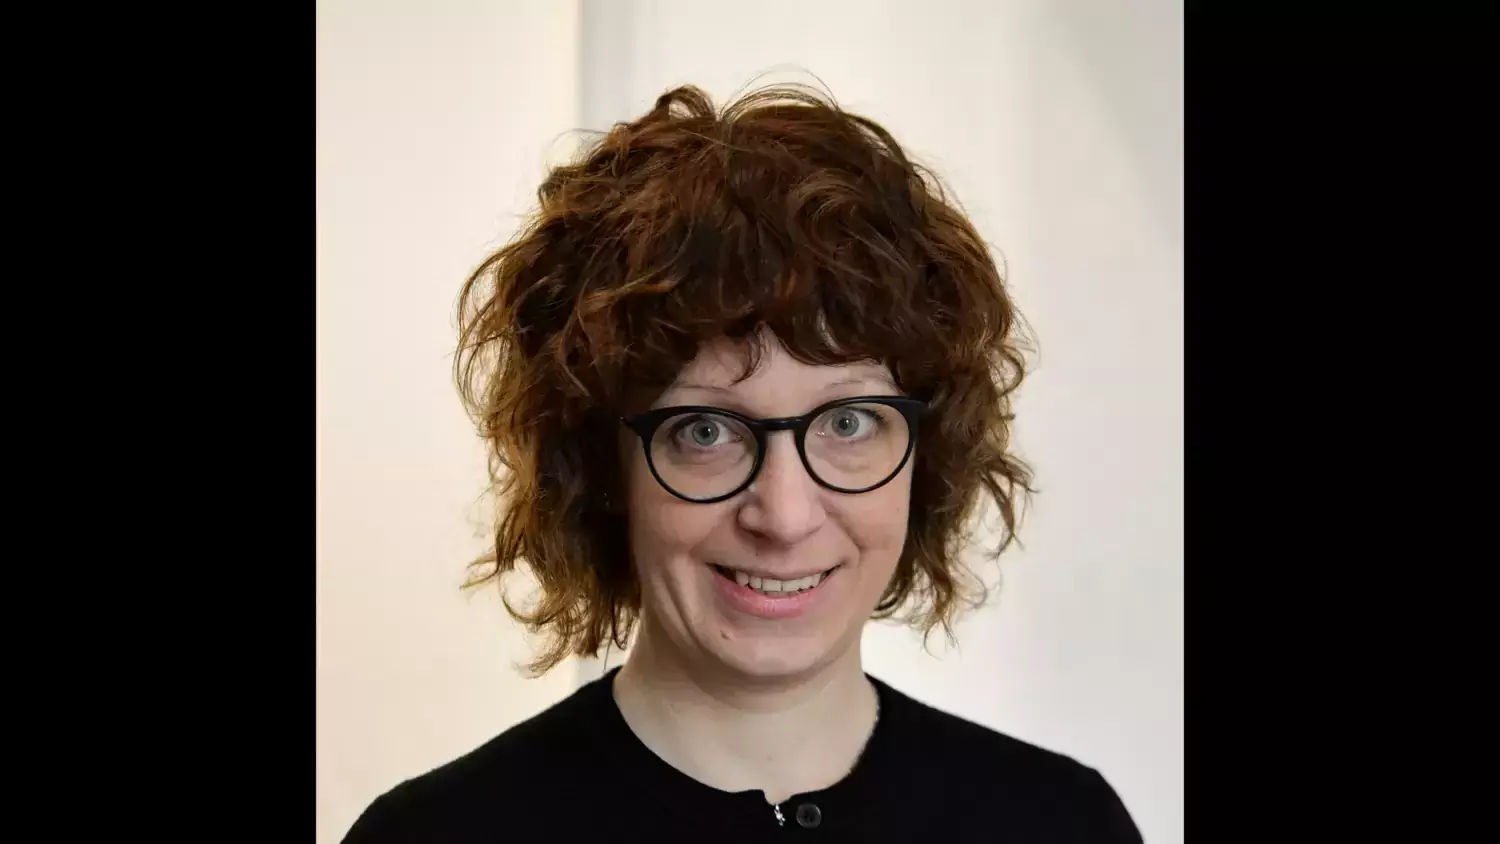 Profile photo of Hedvig Glans, a woman with short curly red hair and a black jumper